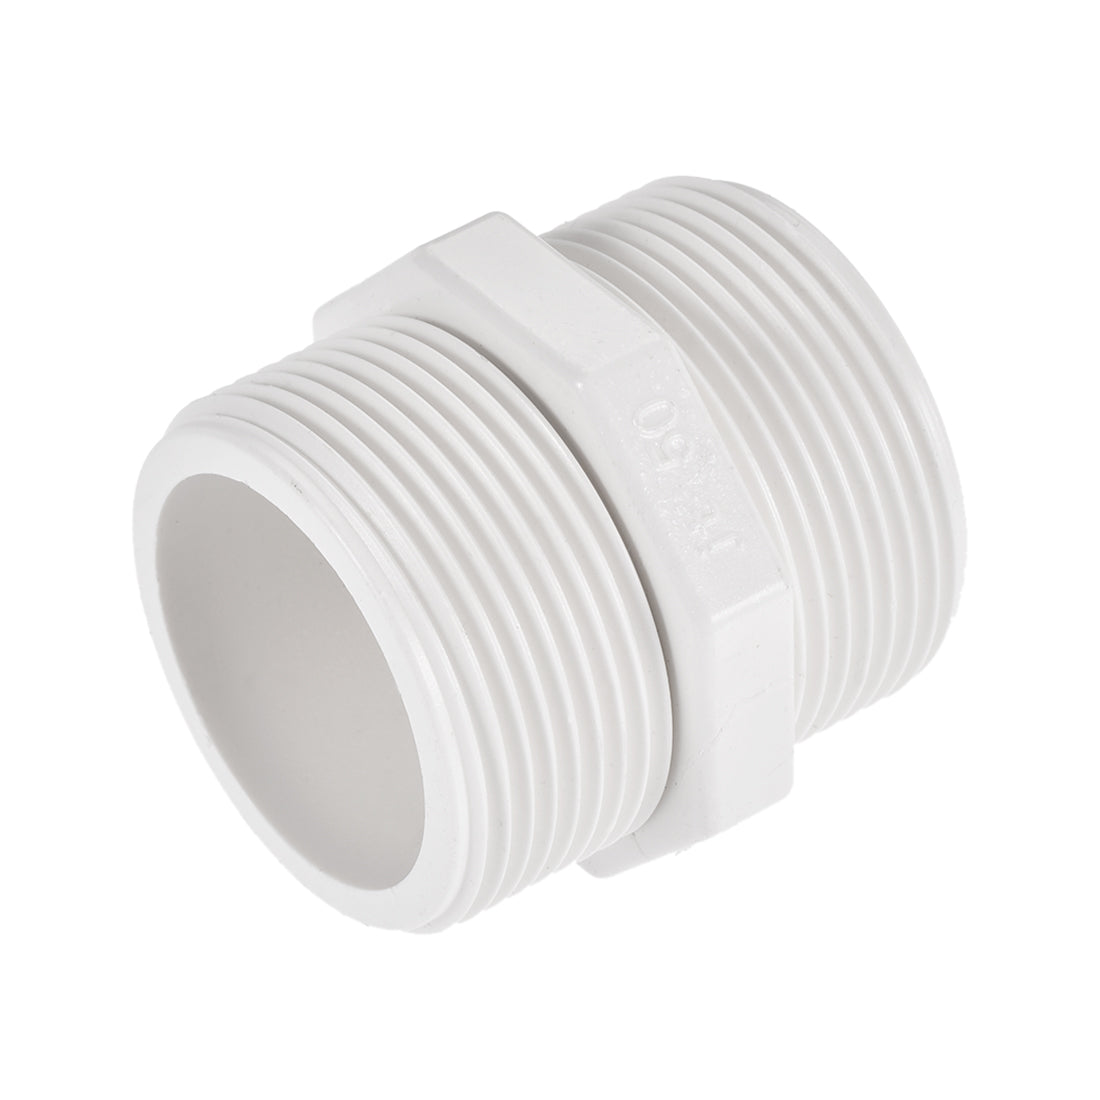 Uxcell Uxcell Pipe Fitting, G2 Male Thread, Hex Nipple Tube Adaptor Hose Connector, for Water Tanks, PVC, White